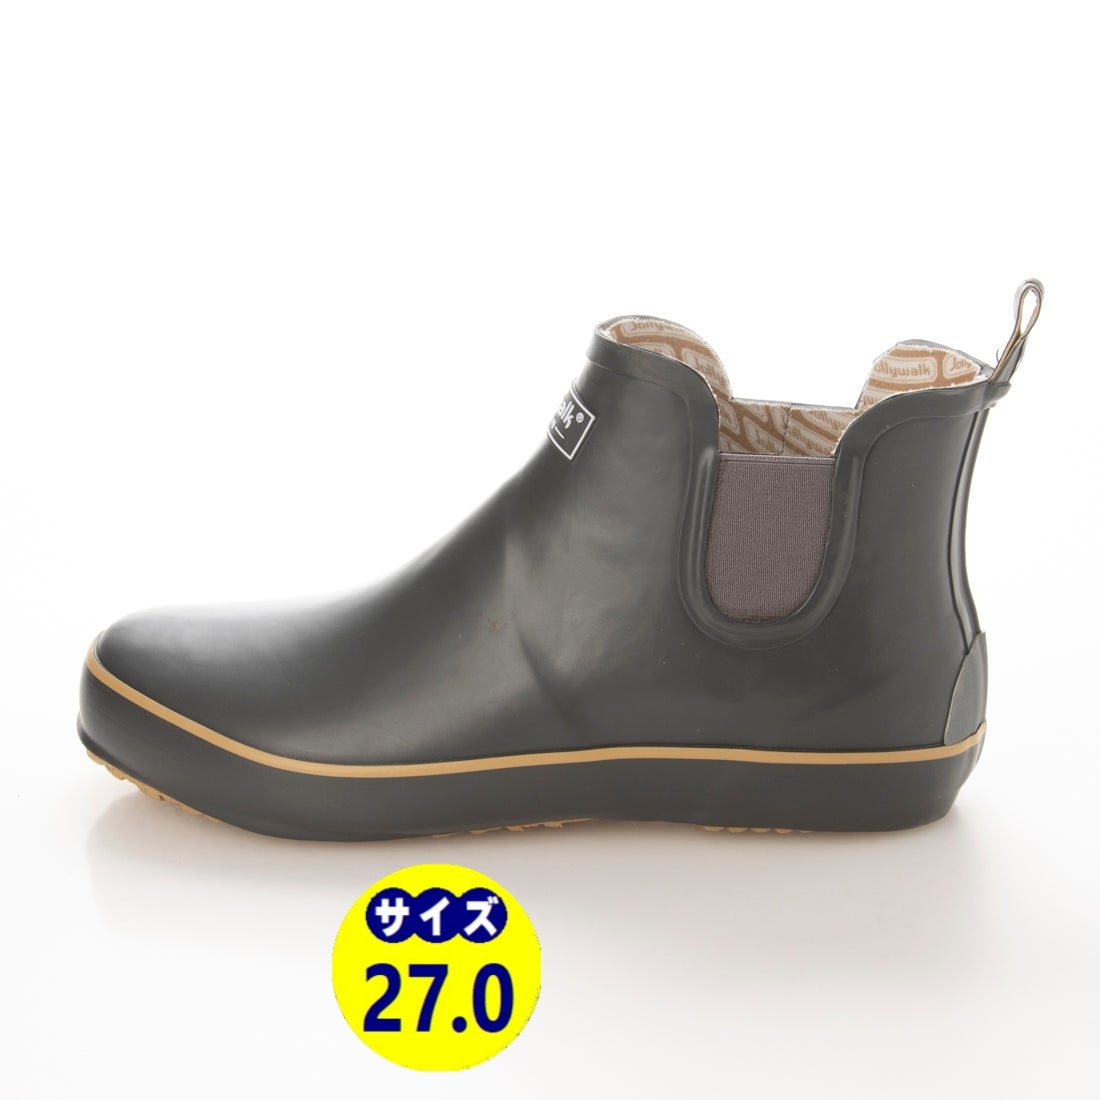  men's rain boots rain shoes boots rain shoes natural rubber material new goods [20088-GRY-270]27.0cm stock one . sale 